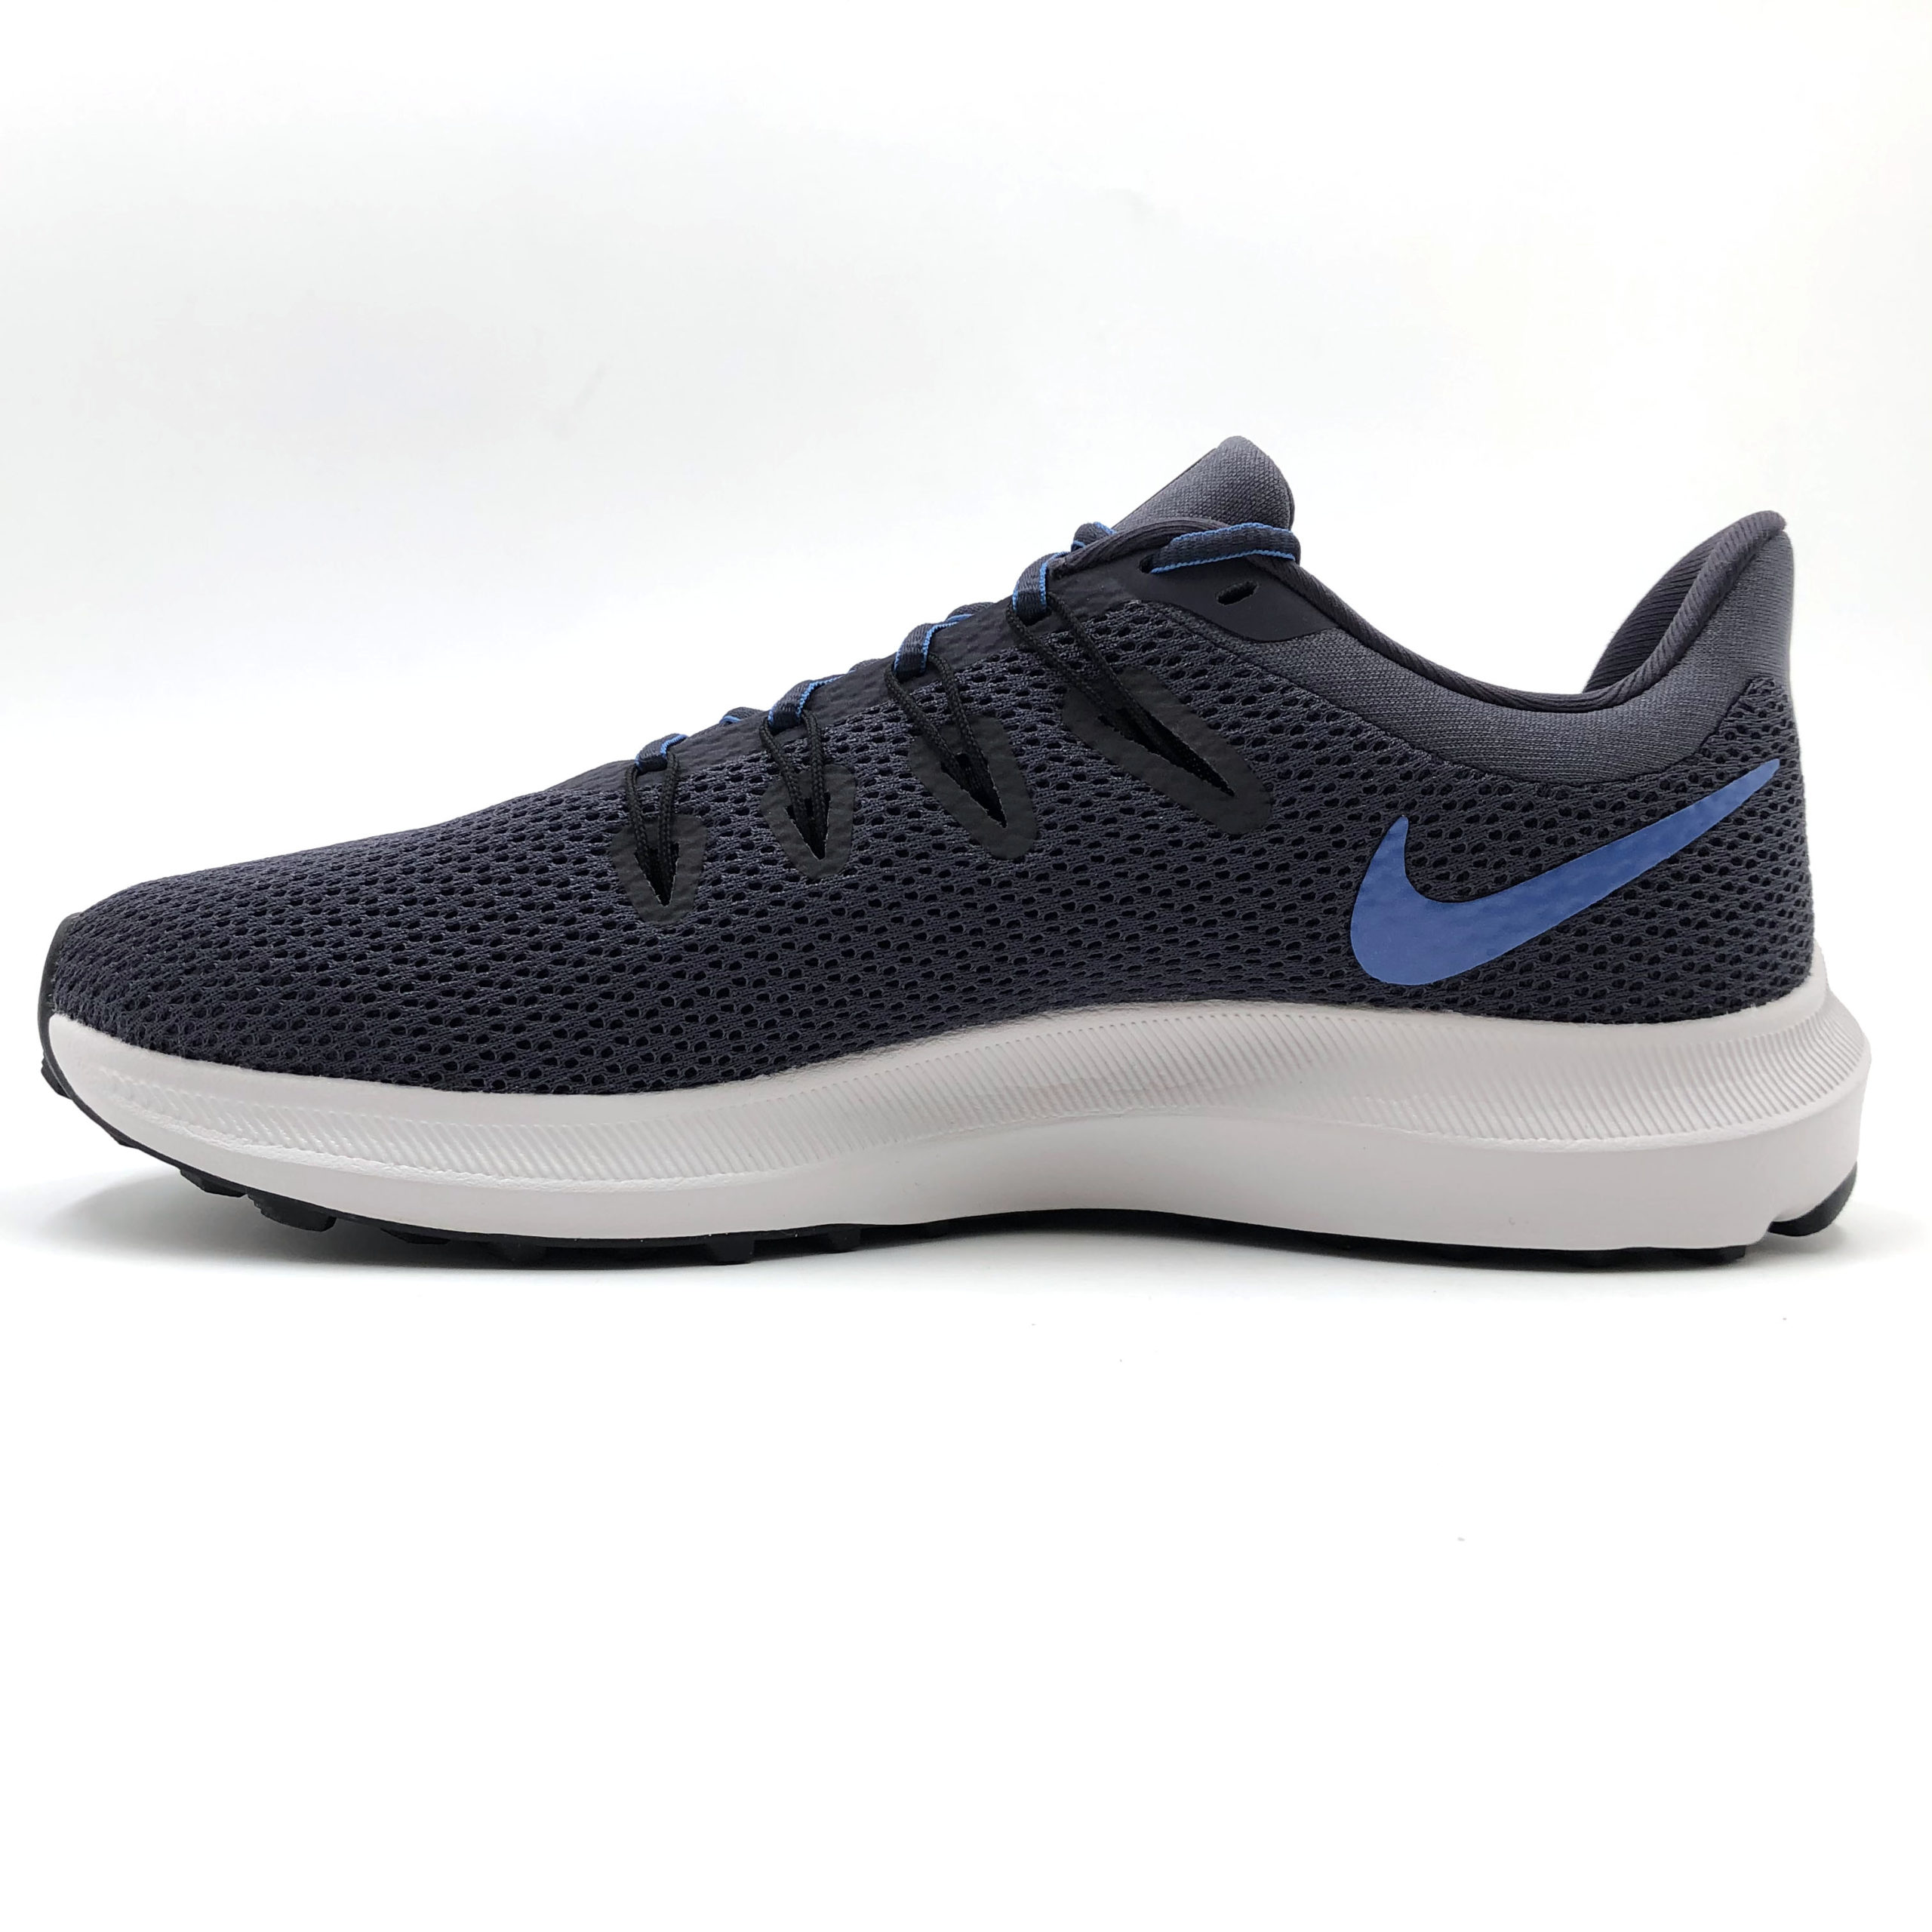 Topper Sports Malaysia NIKE  QUEST  2 